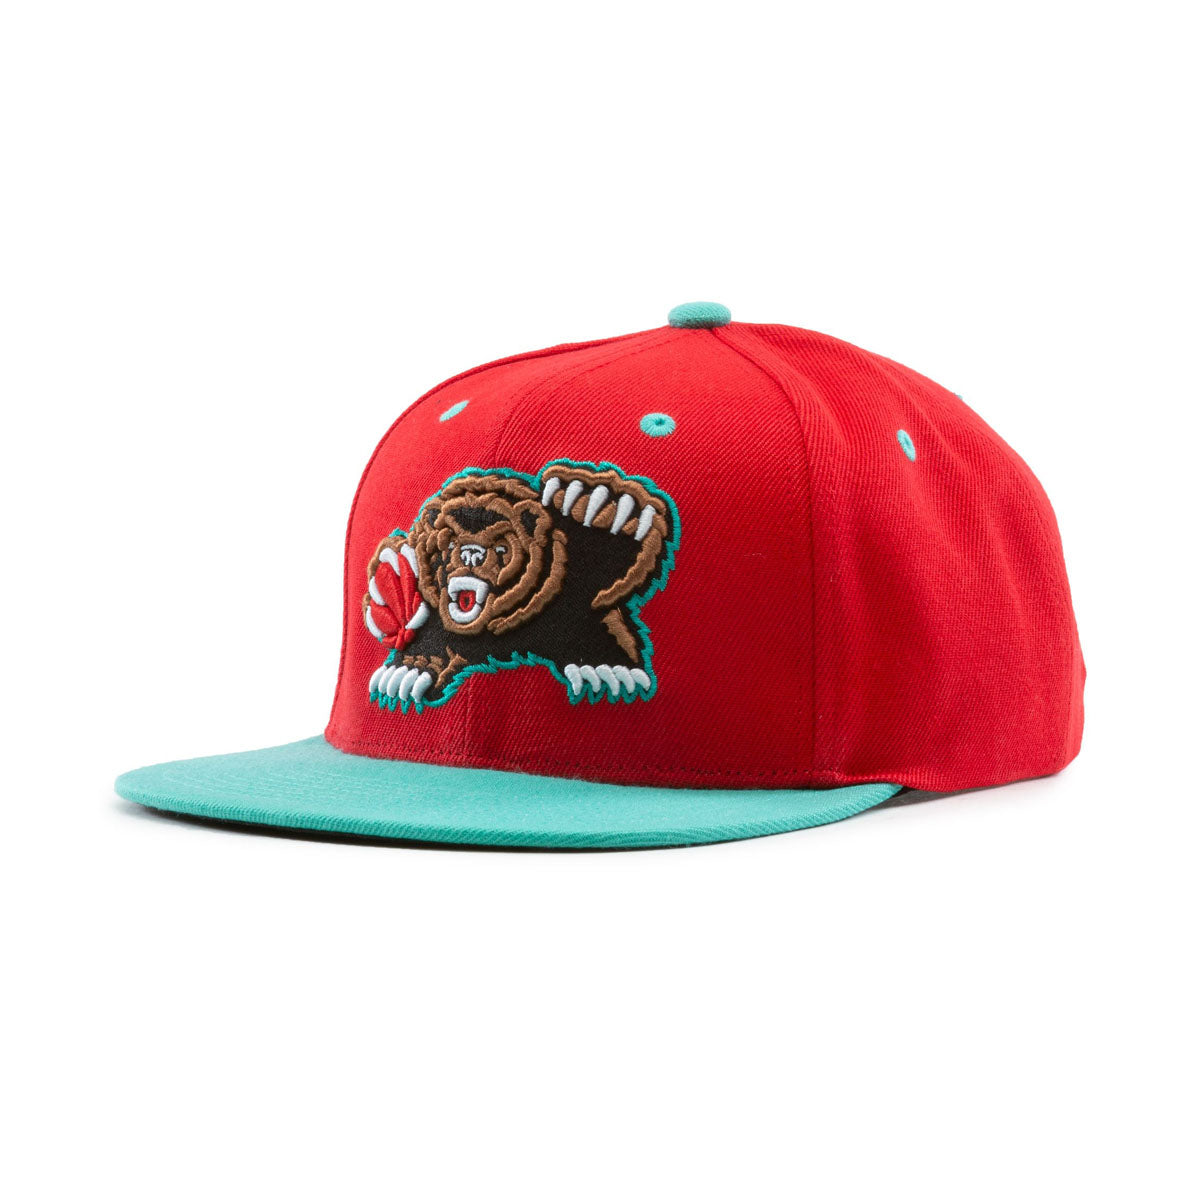 Mitchell & Ness Vancouver Grizzlies NBA White Snapback Hat Cap